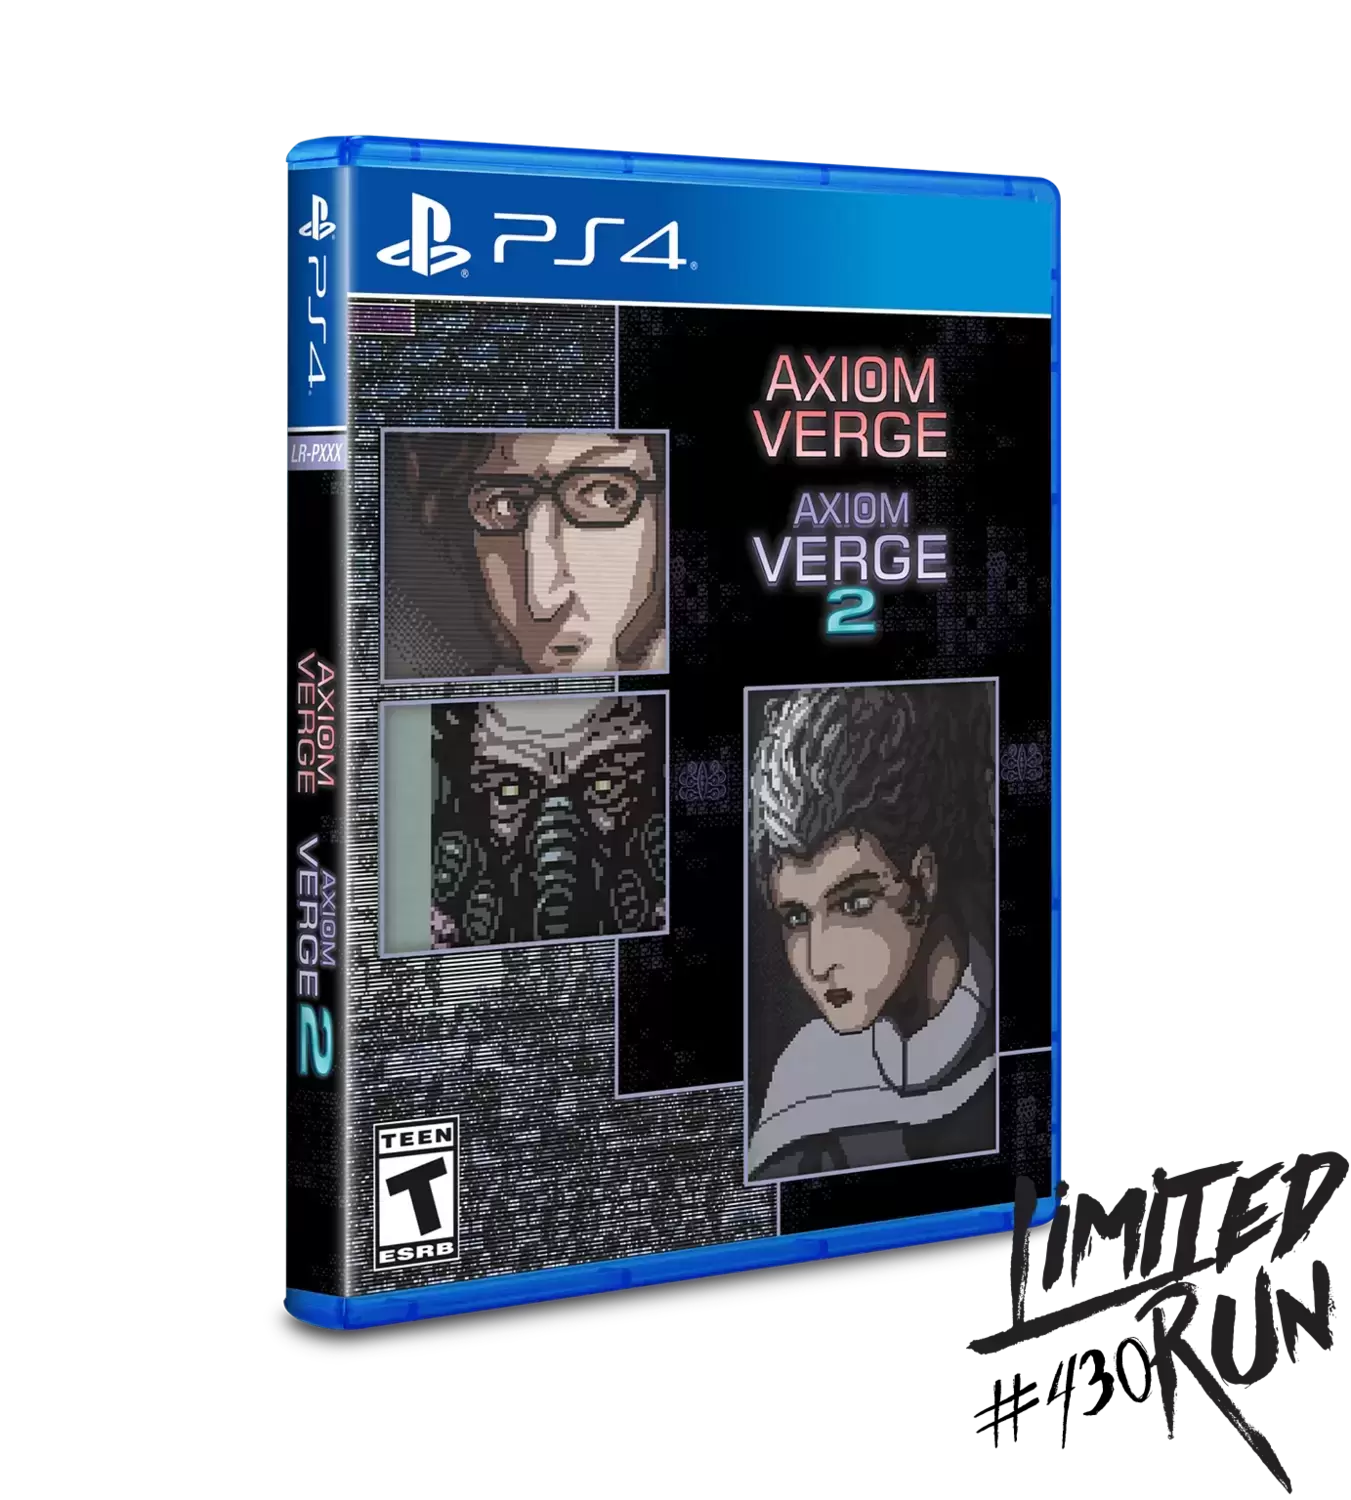 PS4 Games - Axiom Verge 1 & 2 Double Pack - Limited Run Games